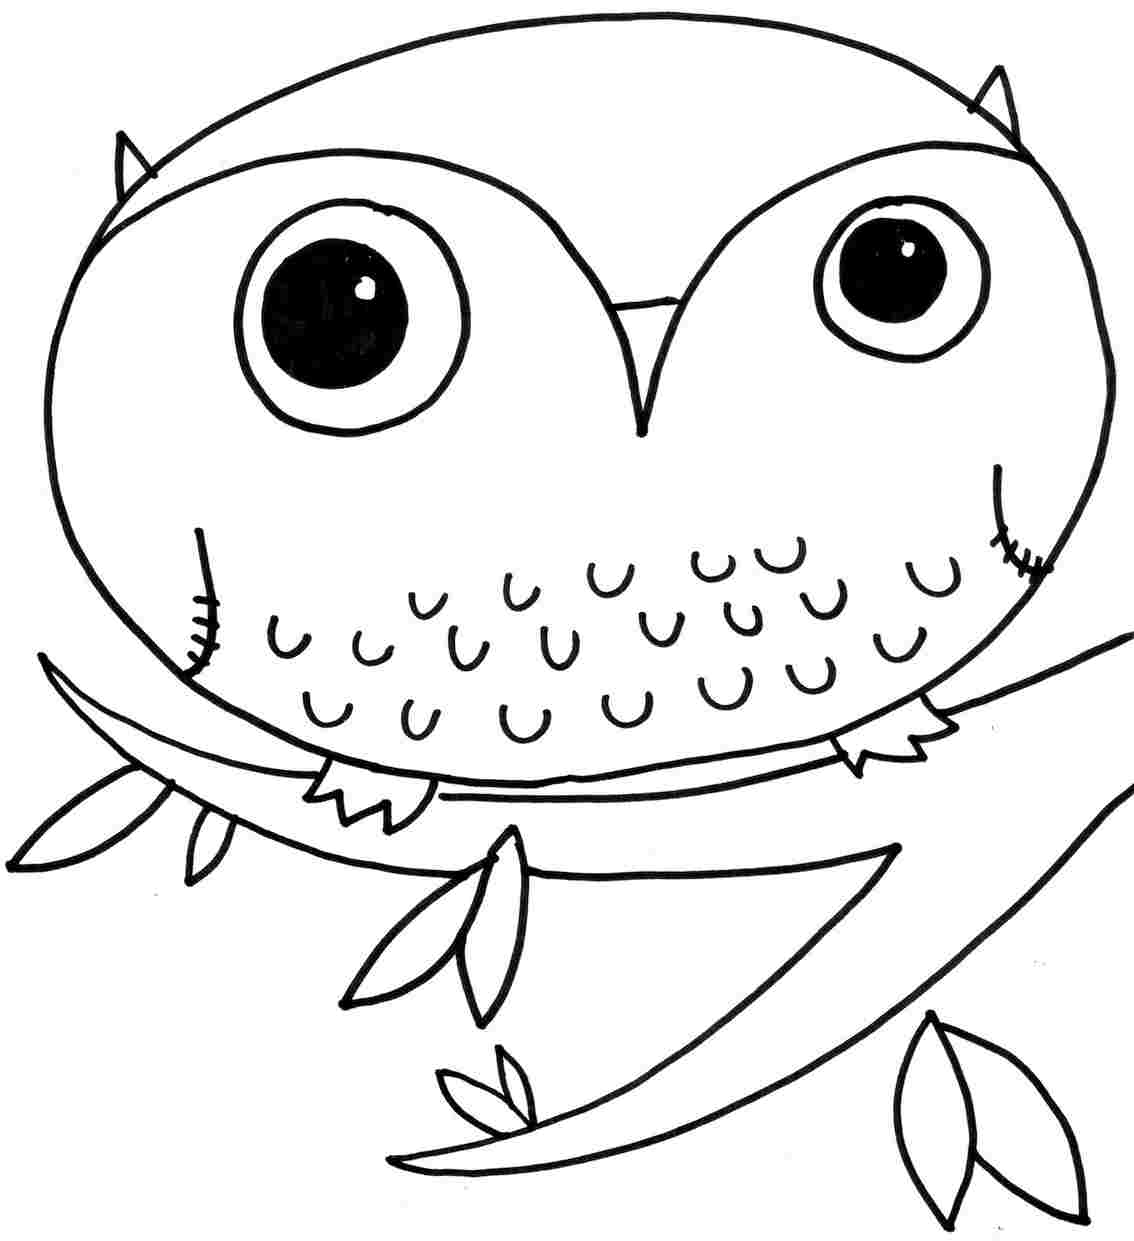 Adorable Cute Owl Coloring Pages Pdf Free - coloring pages Adorable Cute Owl